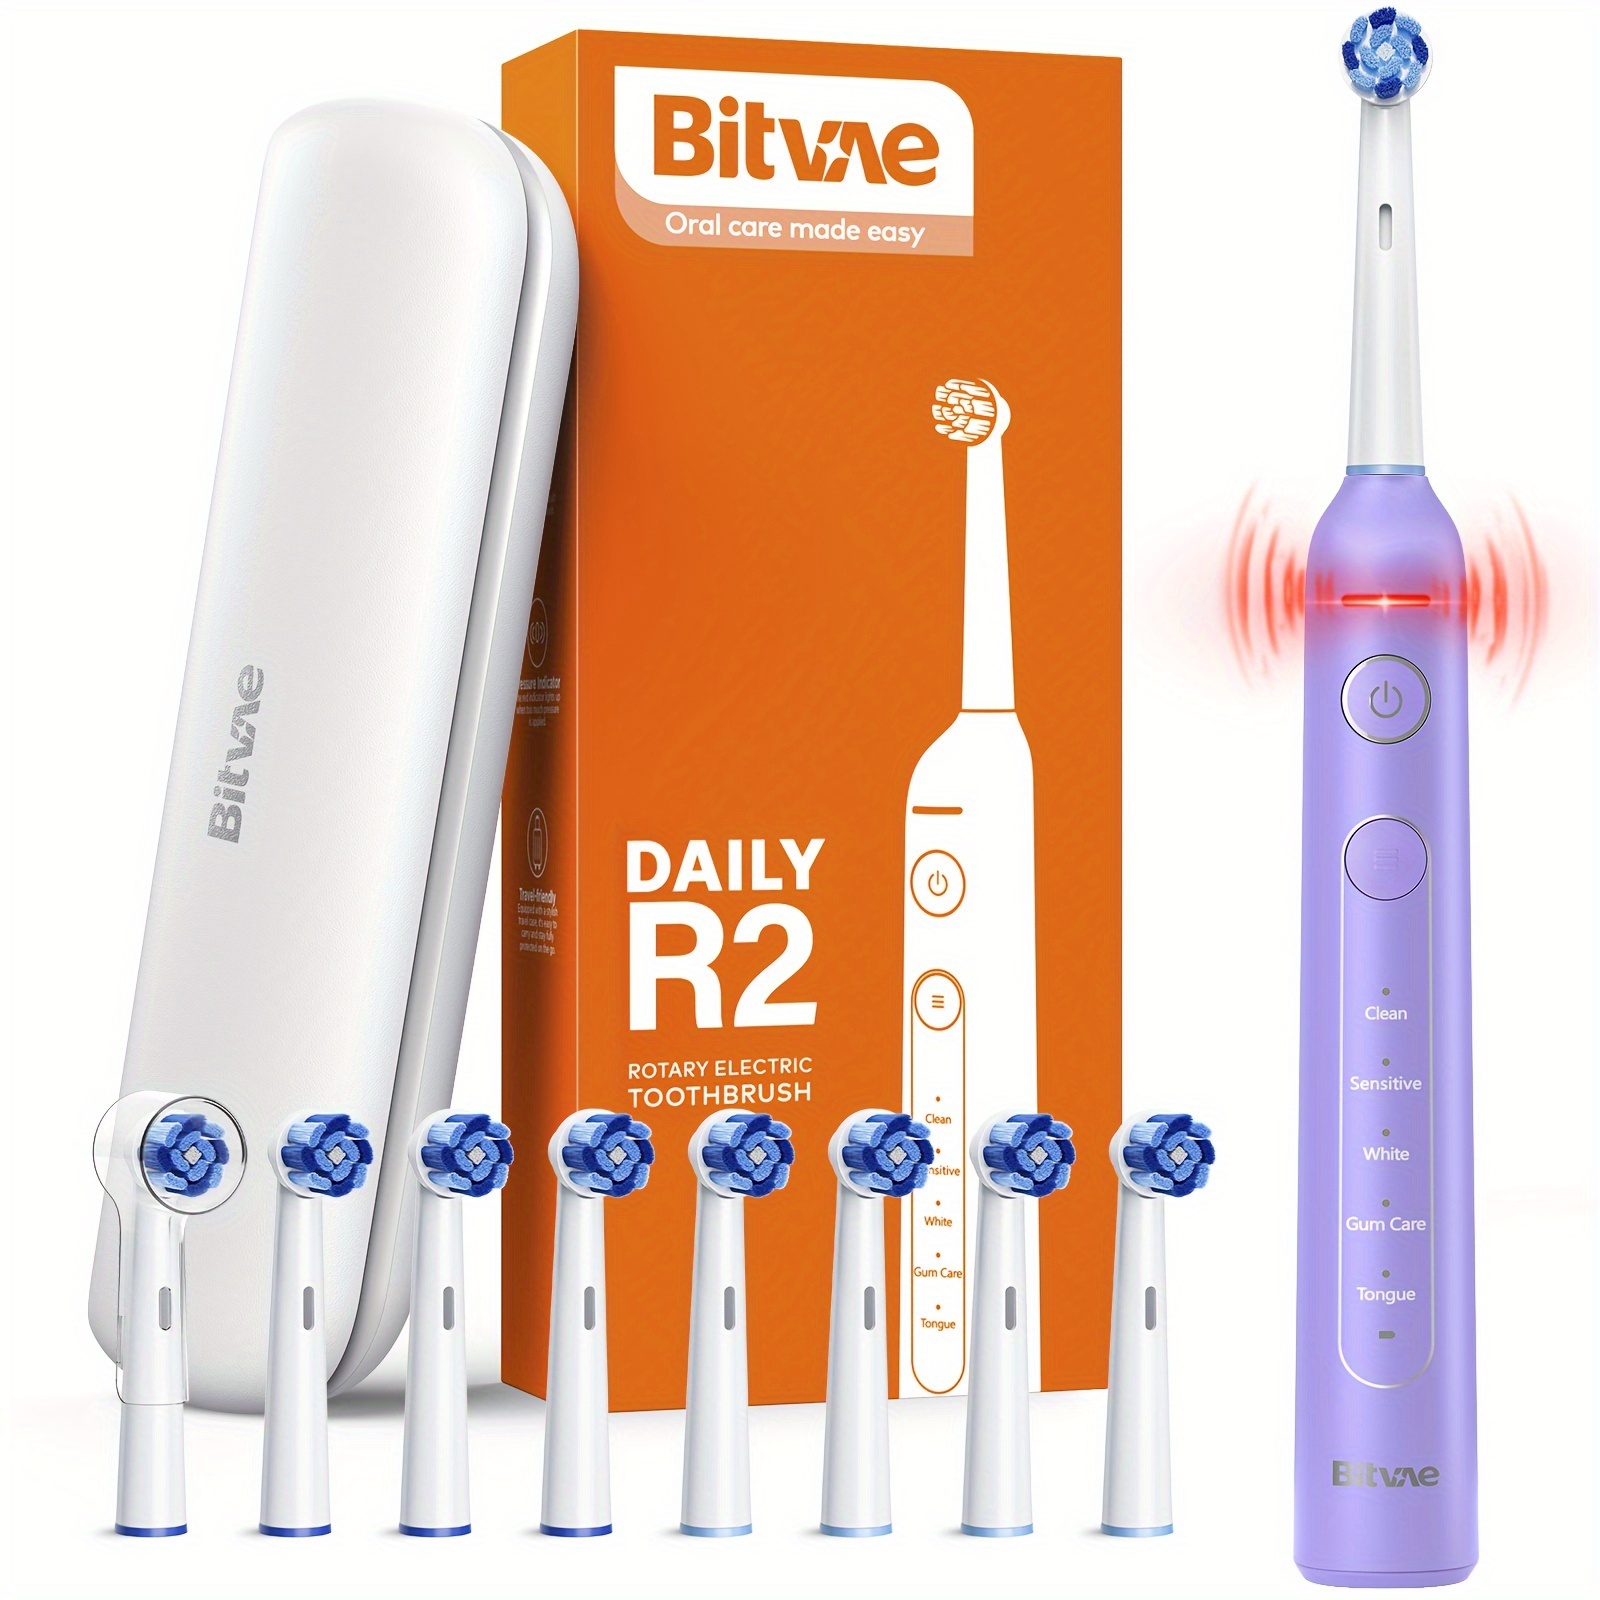 

Bitvae R2 Rotating Electric Toothbrush For Adults With 8 Brush Heads, 5 Modes Rechargeable Power Toothbrush With Pressure Sensor, Purple